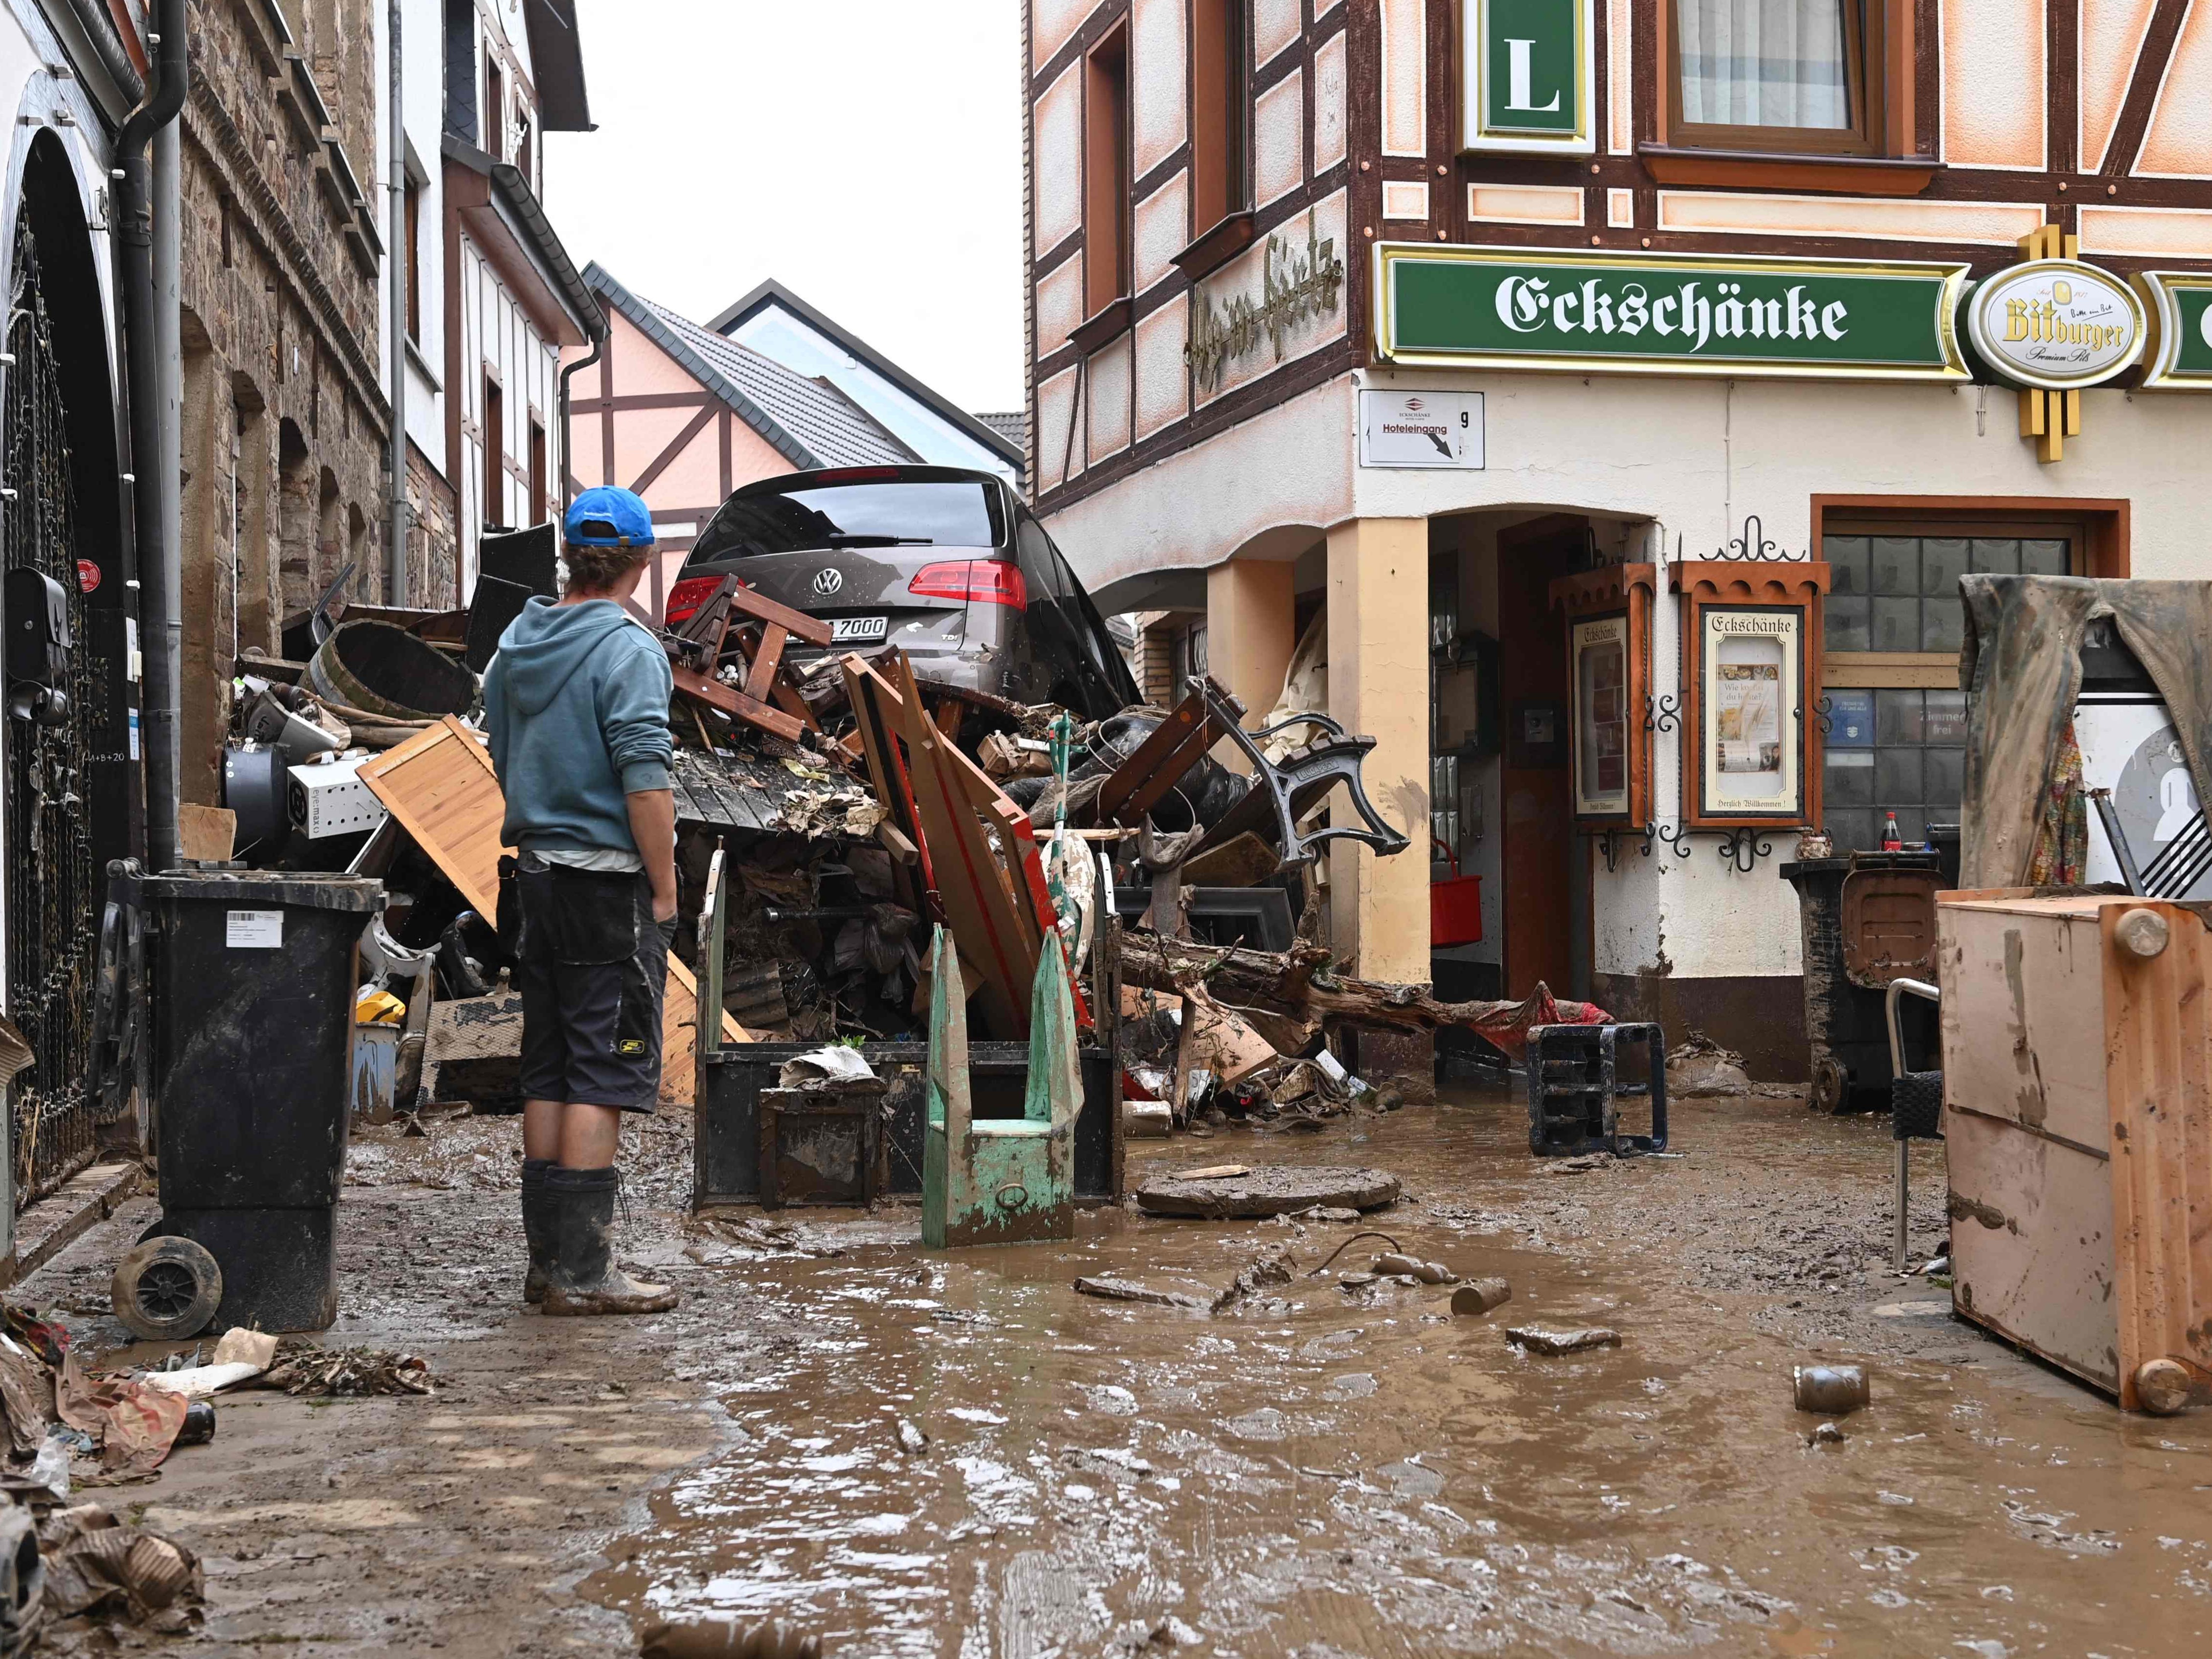 A local resident stands next to debris and a damaged car in a street in Bad Neuenahr-Ahrweiler, western Germany,